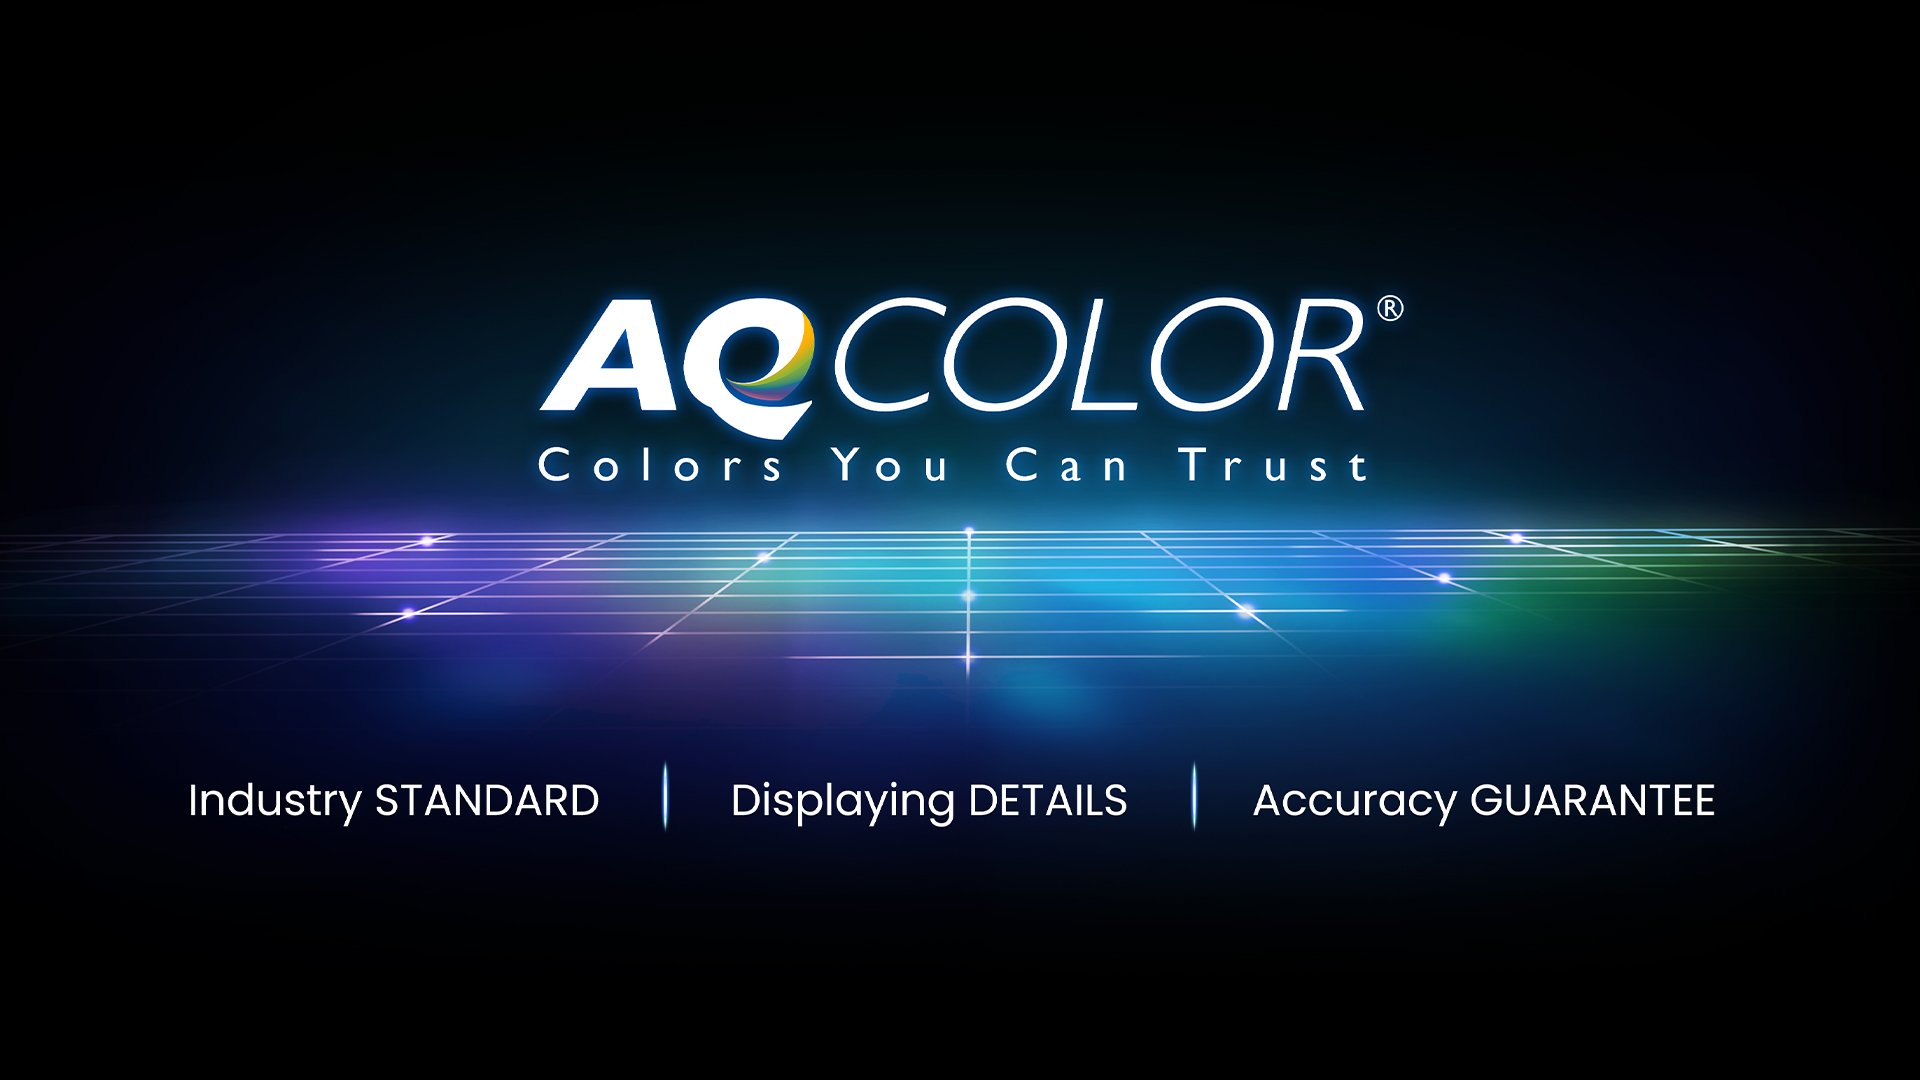 BenQ AQCOLOR technology delivers Accurate Reproduction. This translates to the display of colour precisely as it is intended to appear. Led by a colour expert, the BenQ team took part in the ICC and ISO to establish colour-related standards and implementation guidelines.